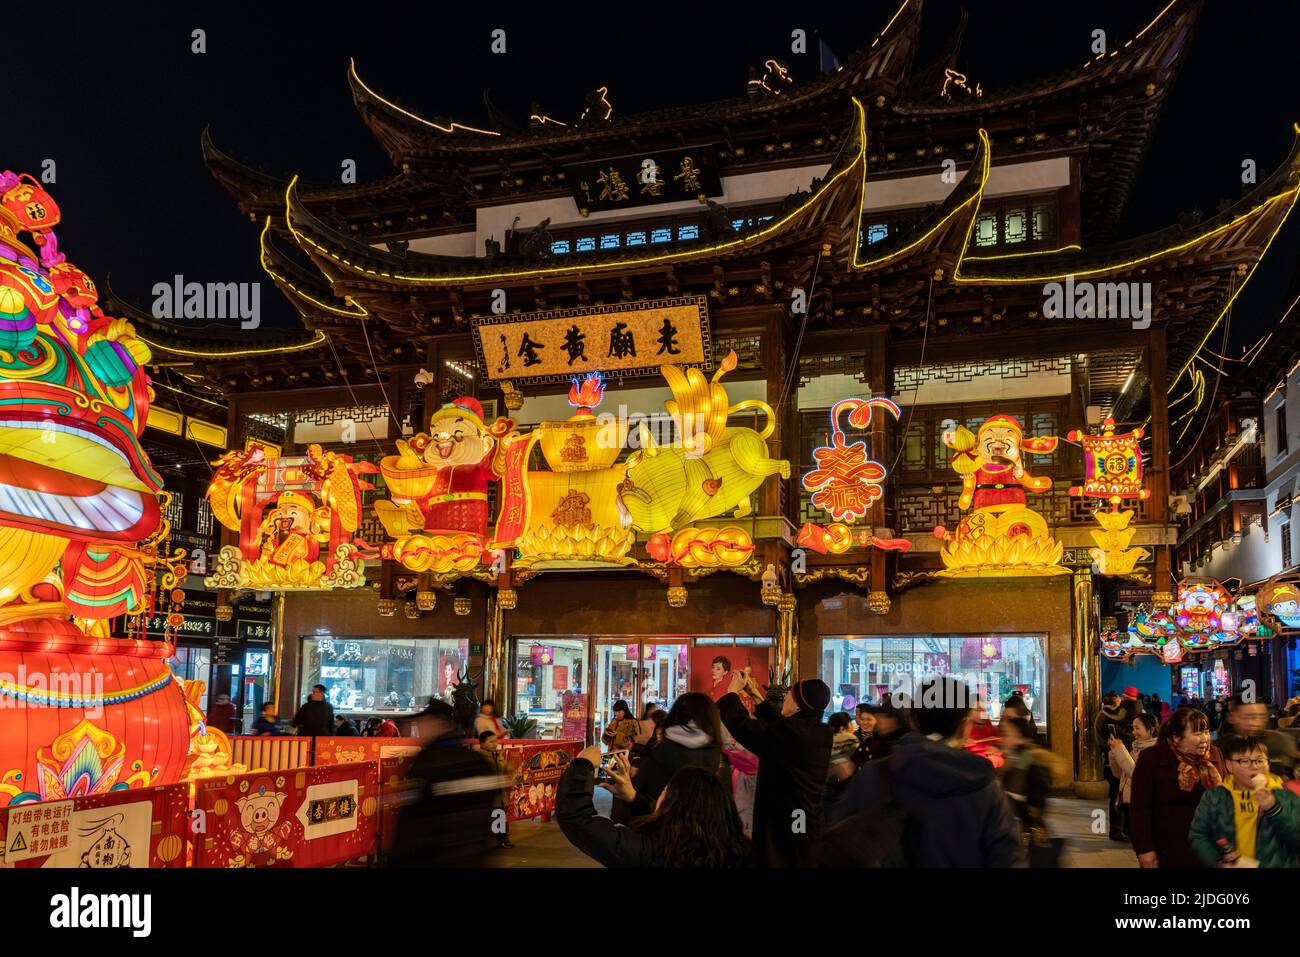 A crowd of tourist walk along the lanes in Yu Yuan, Yu Garden, to admire the display of lanterns during the lantern festival in the Year of the Pig. Stock Photo